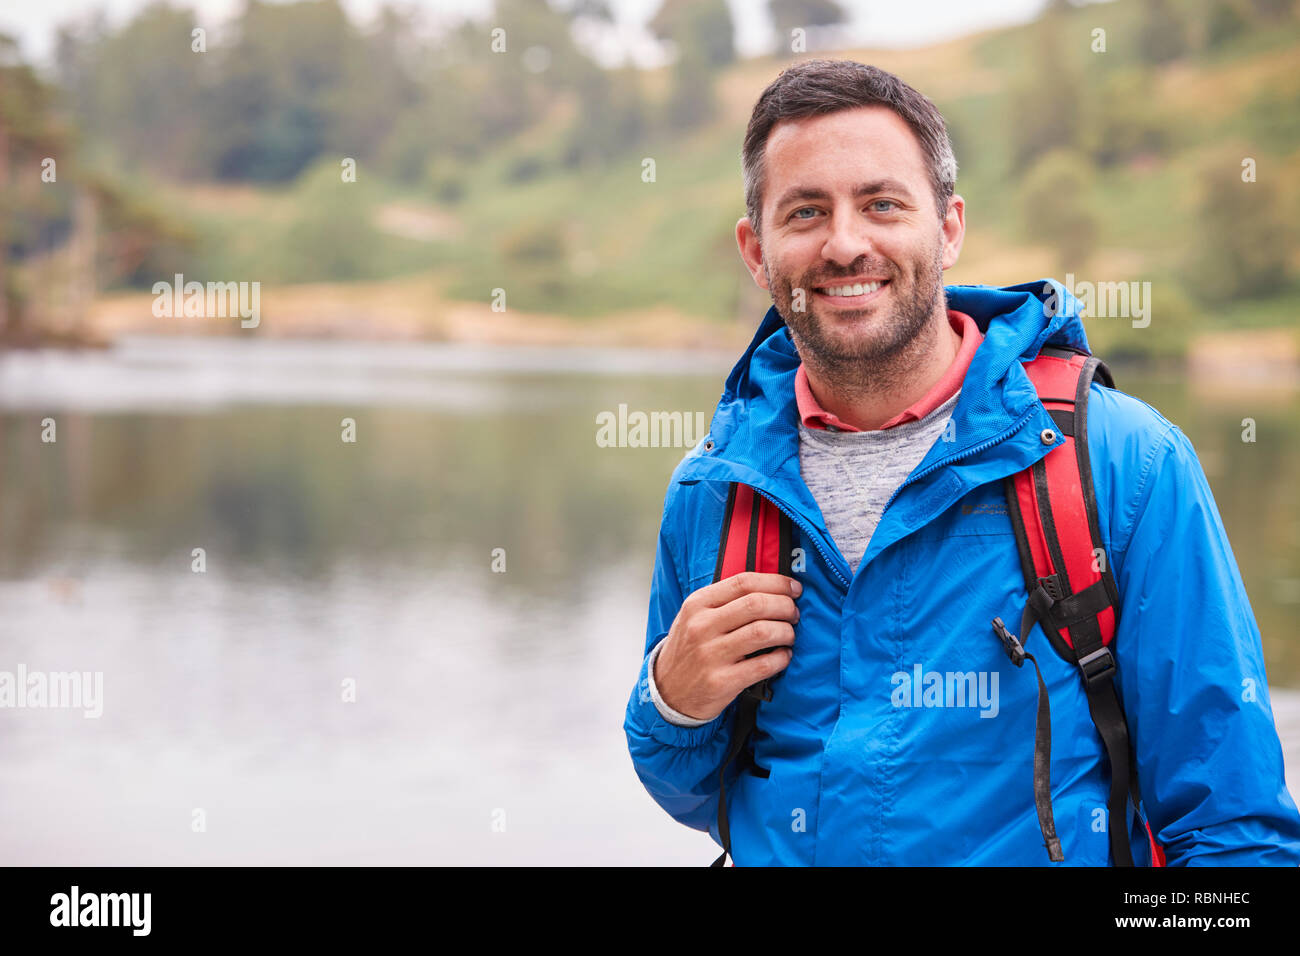 Adult man on a camping holiday standing by a lake smiling to camera, portrait, Lake District, UK Stock Photo